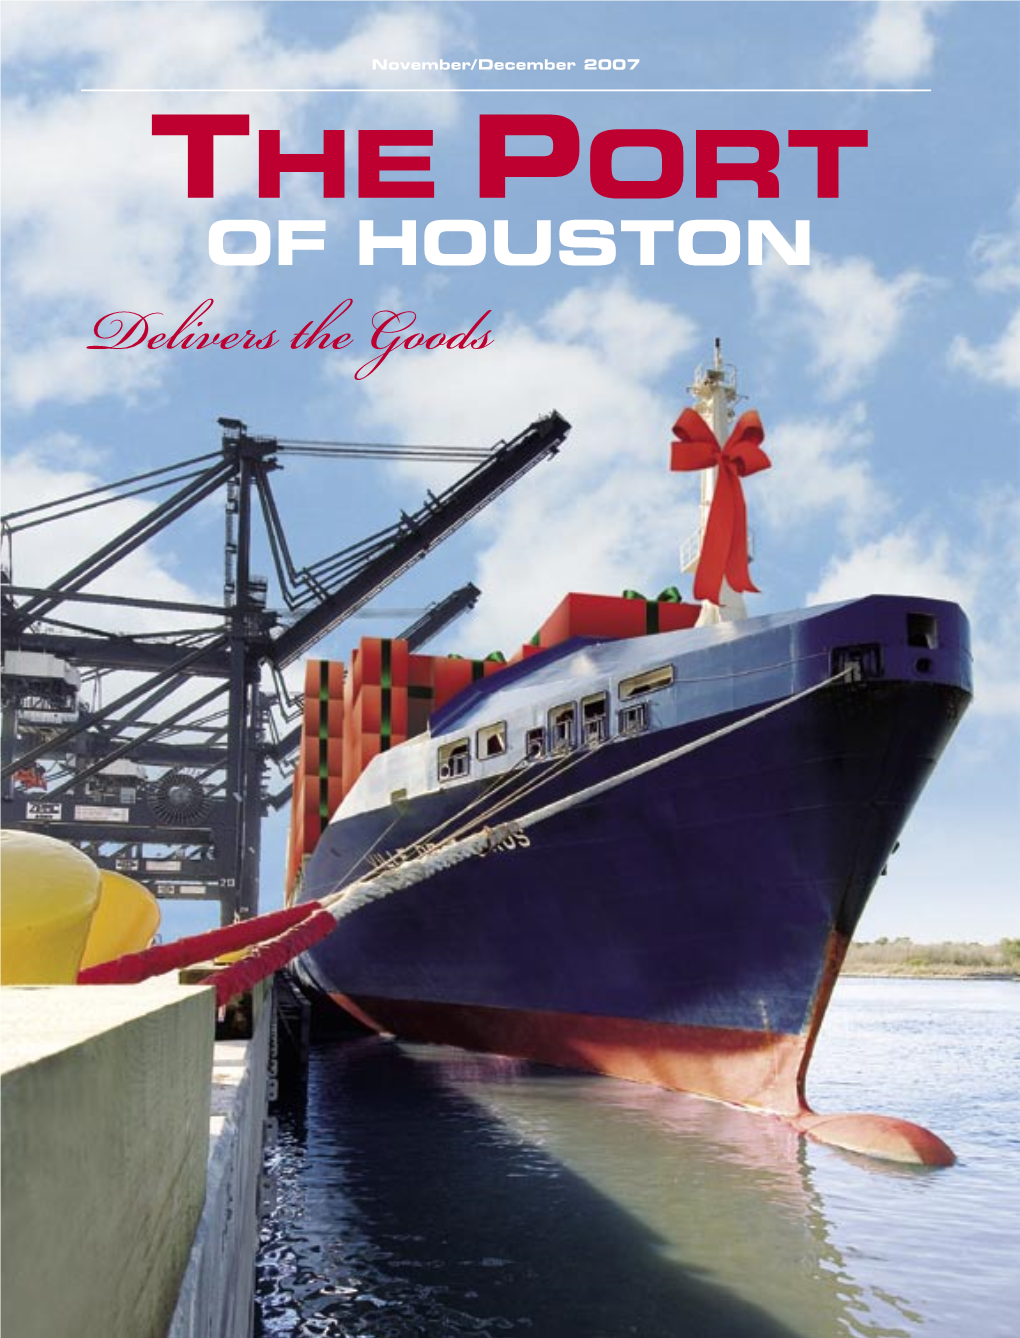 THE PORT of HOUSTON Delivers the Goods